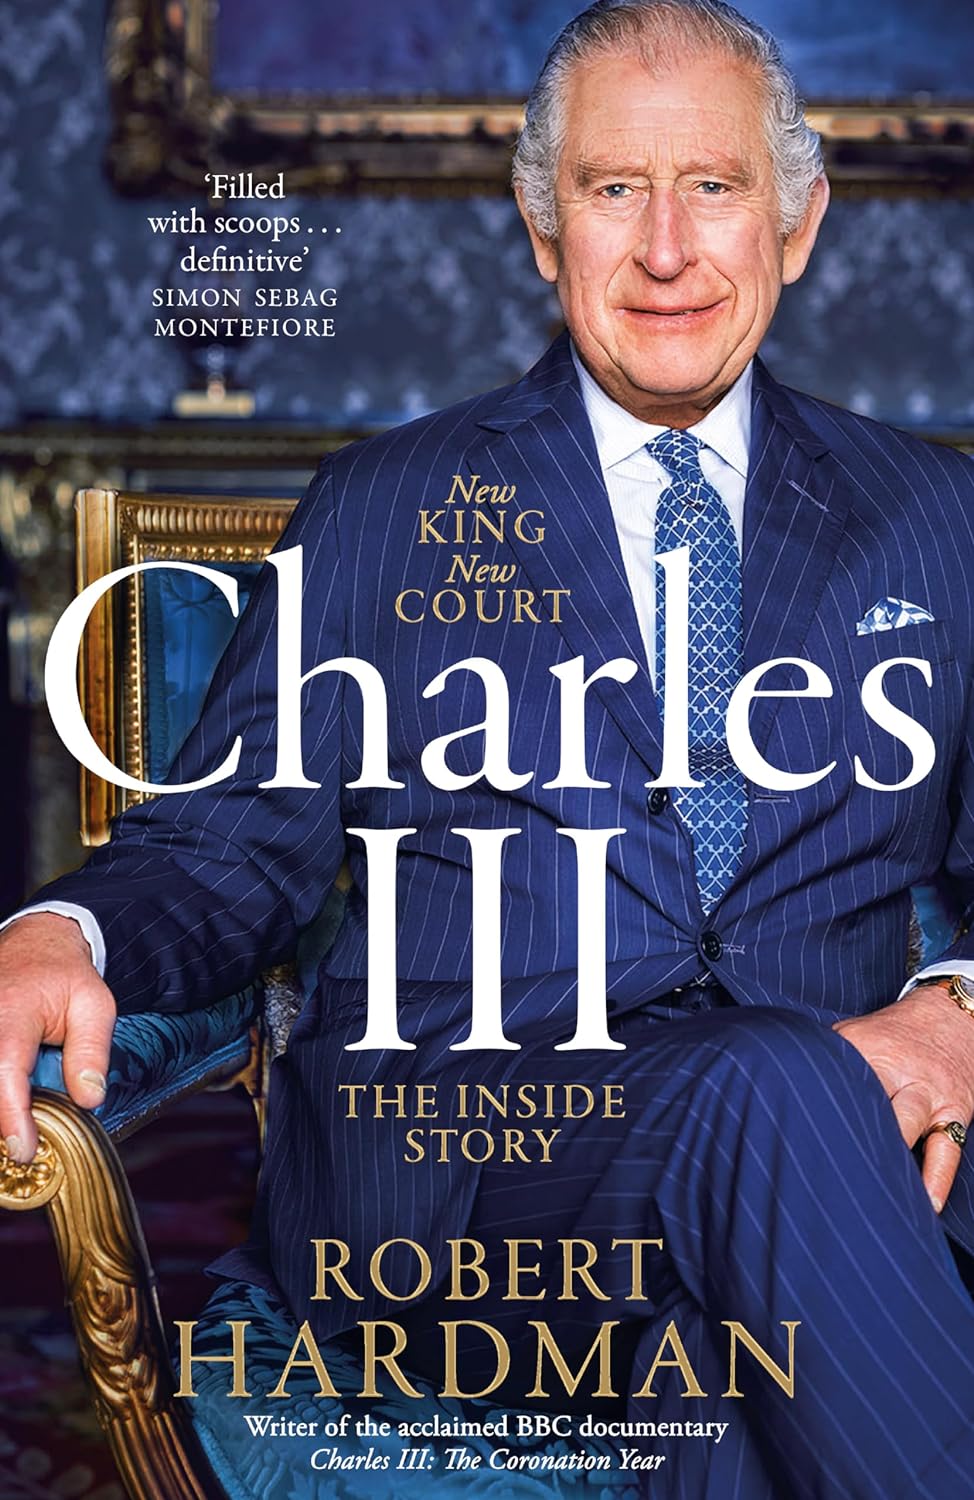 The_Inside_Story_Charles_III_book_front_cover